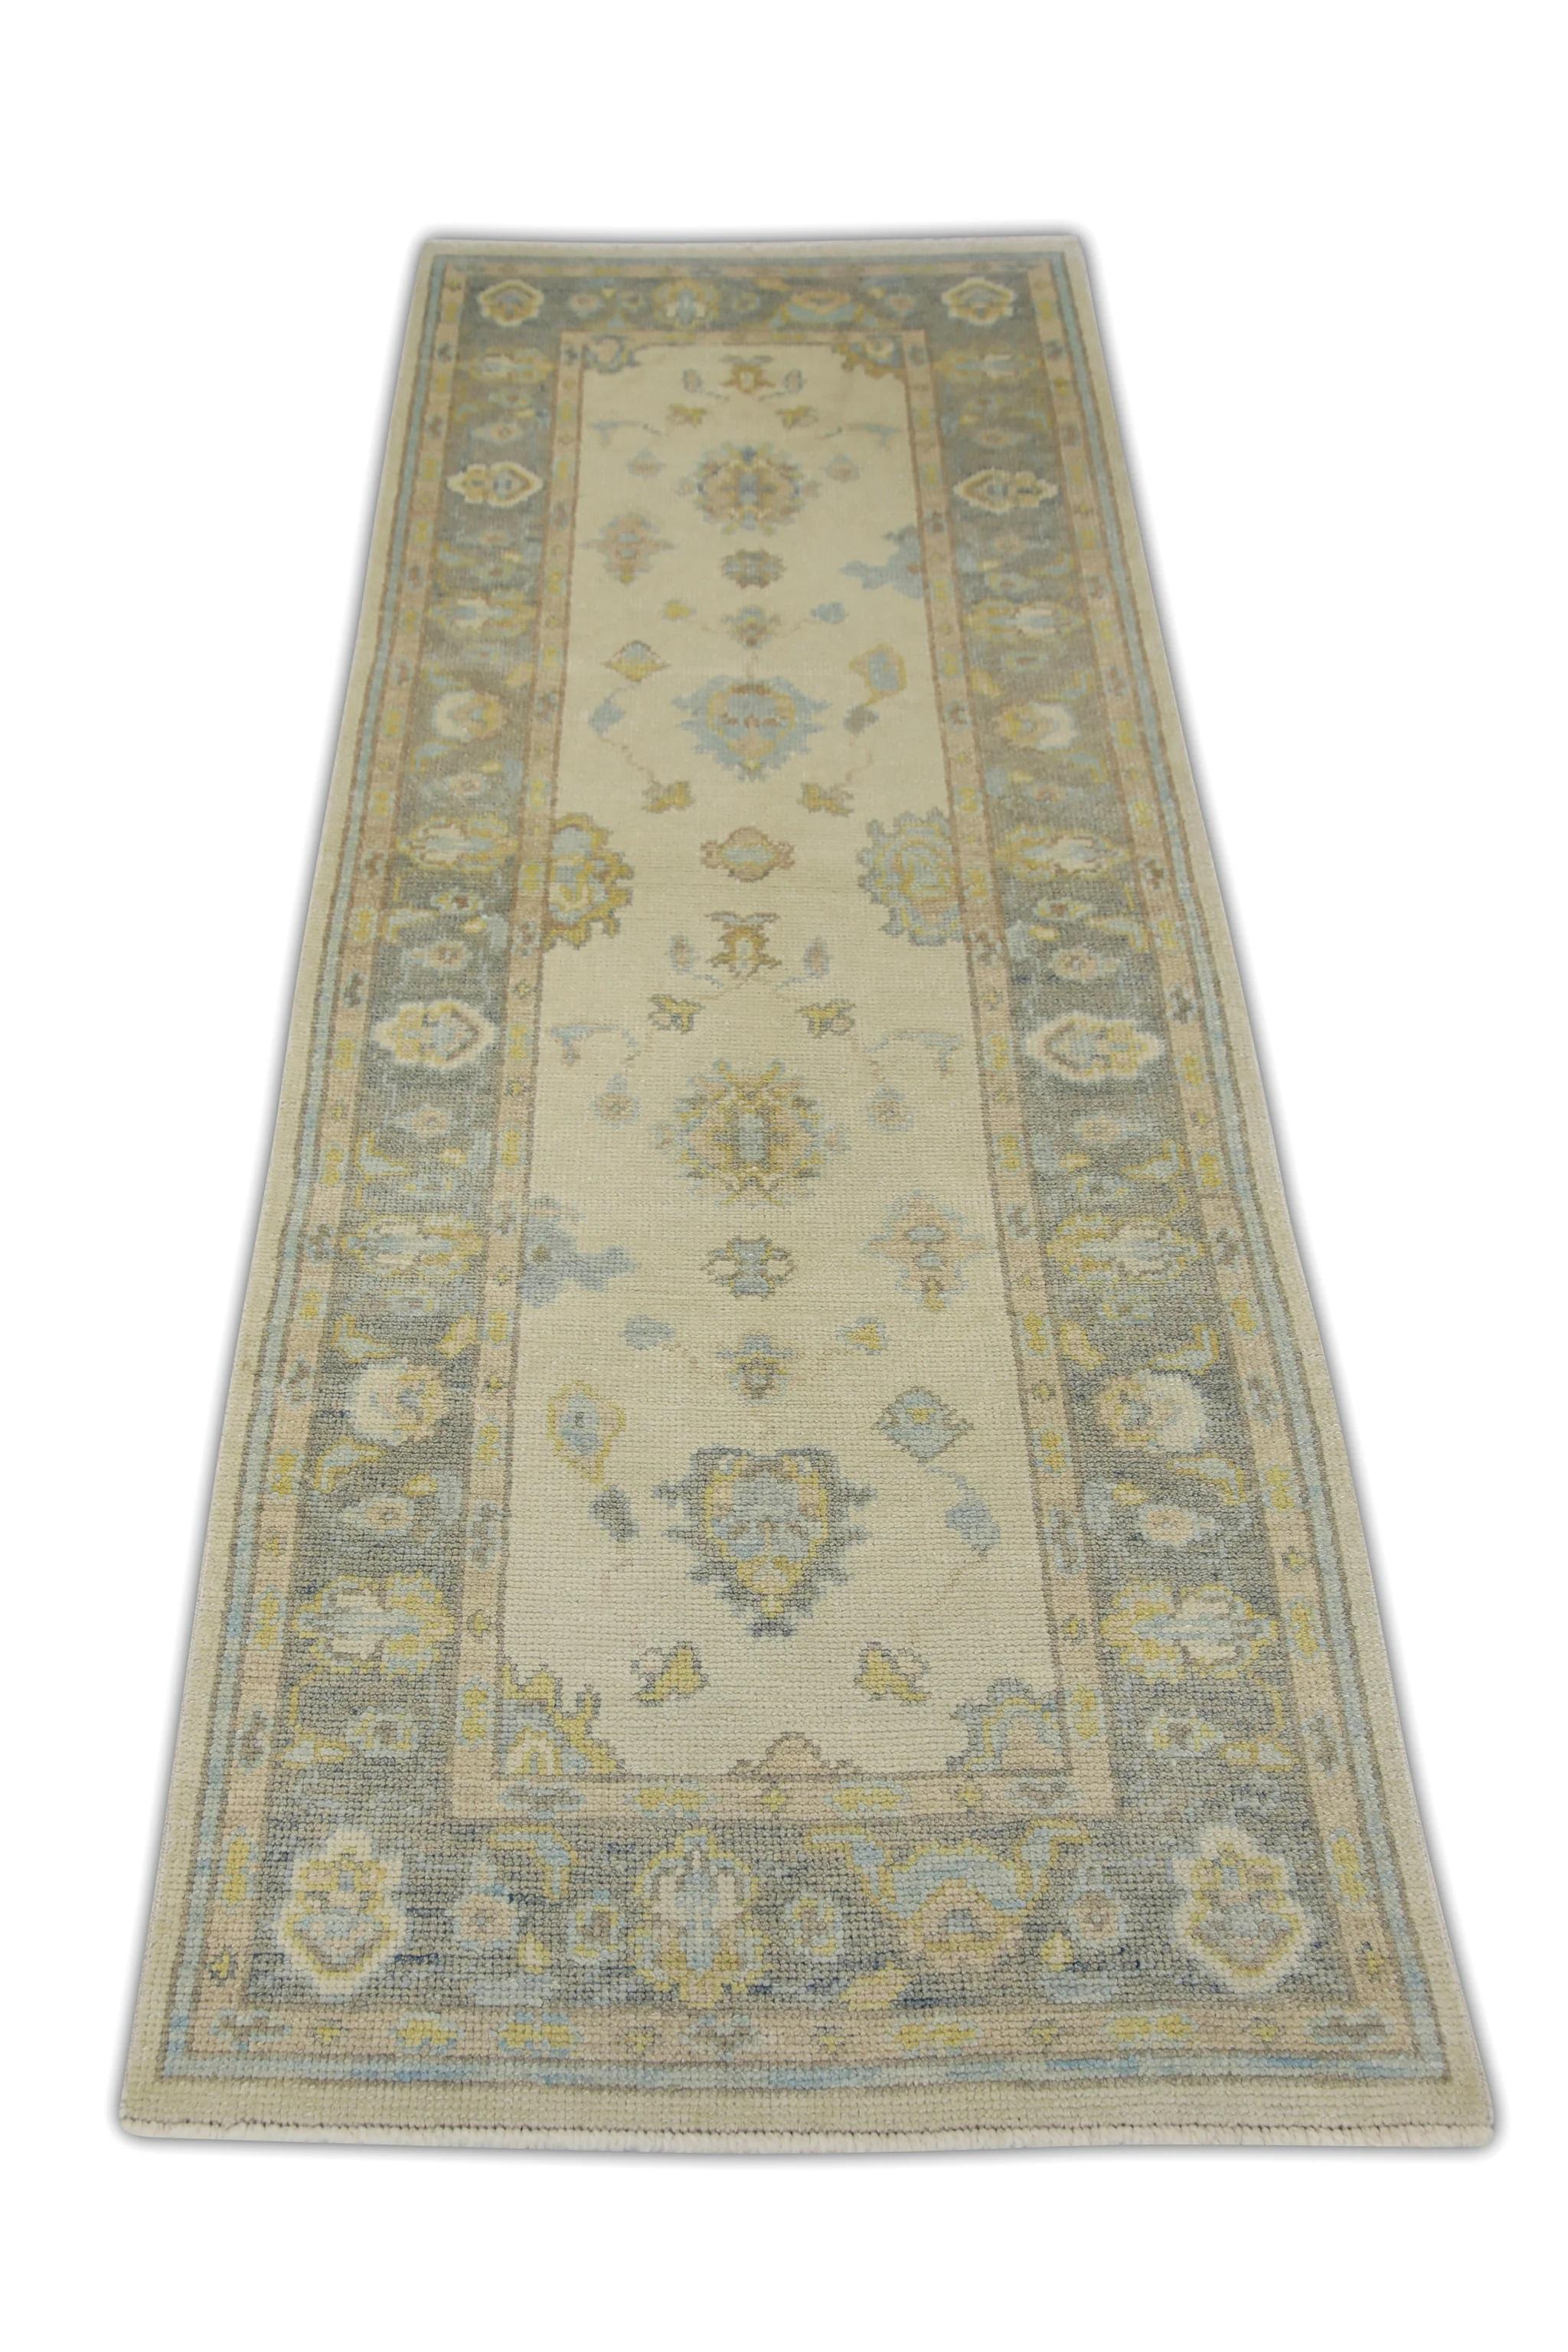 Contemporary Blue and Yellow Handwoven Wool Floral Design Turkish Oushak Rug 3' x 7'10